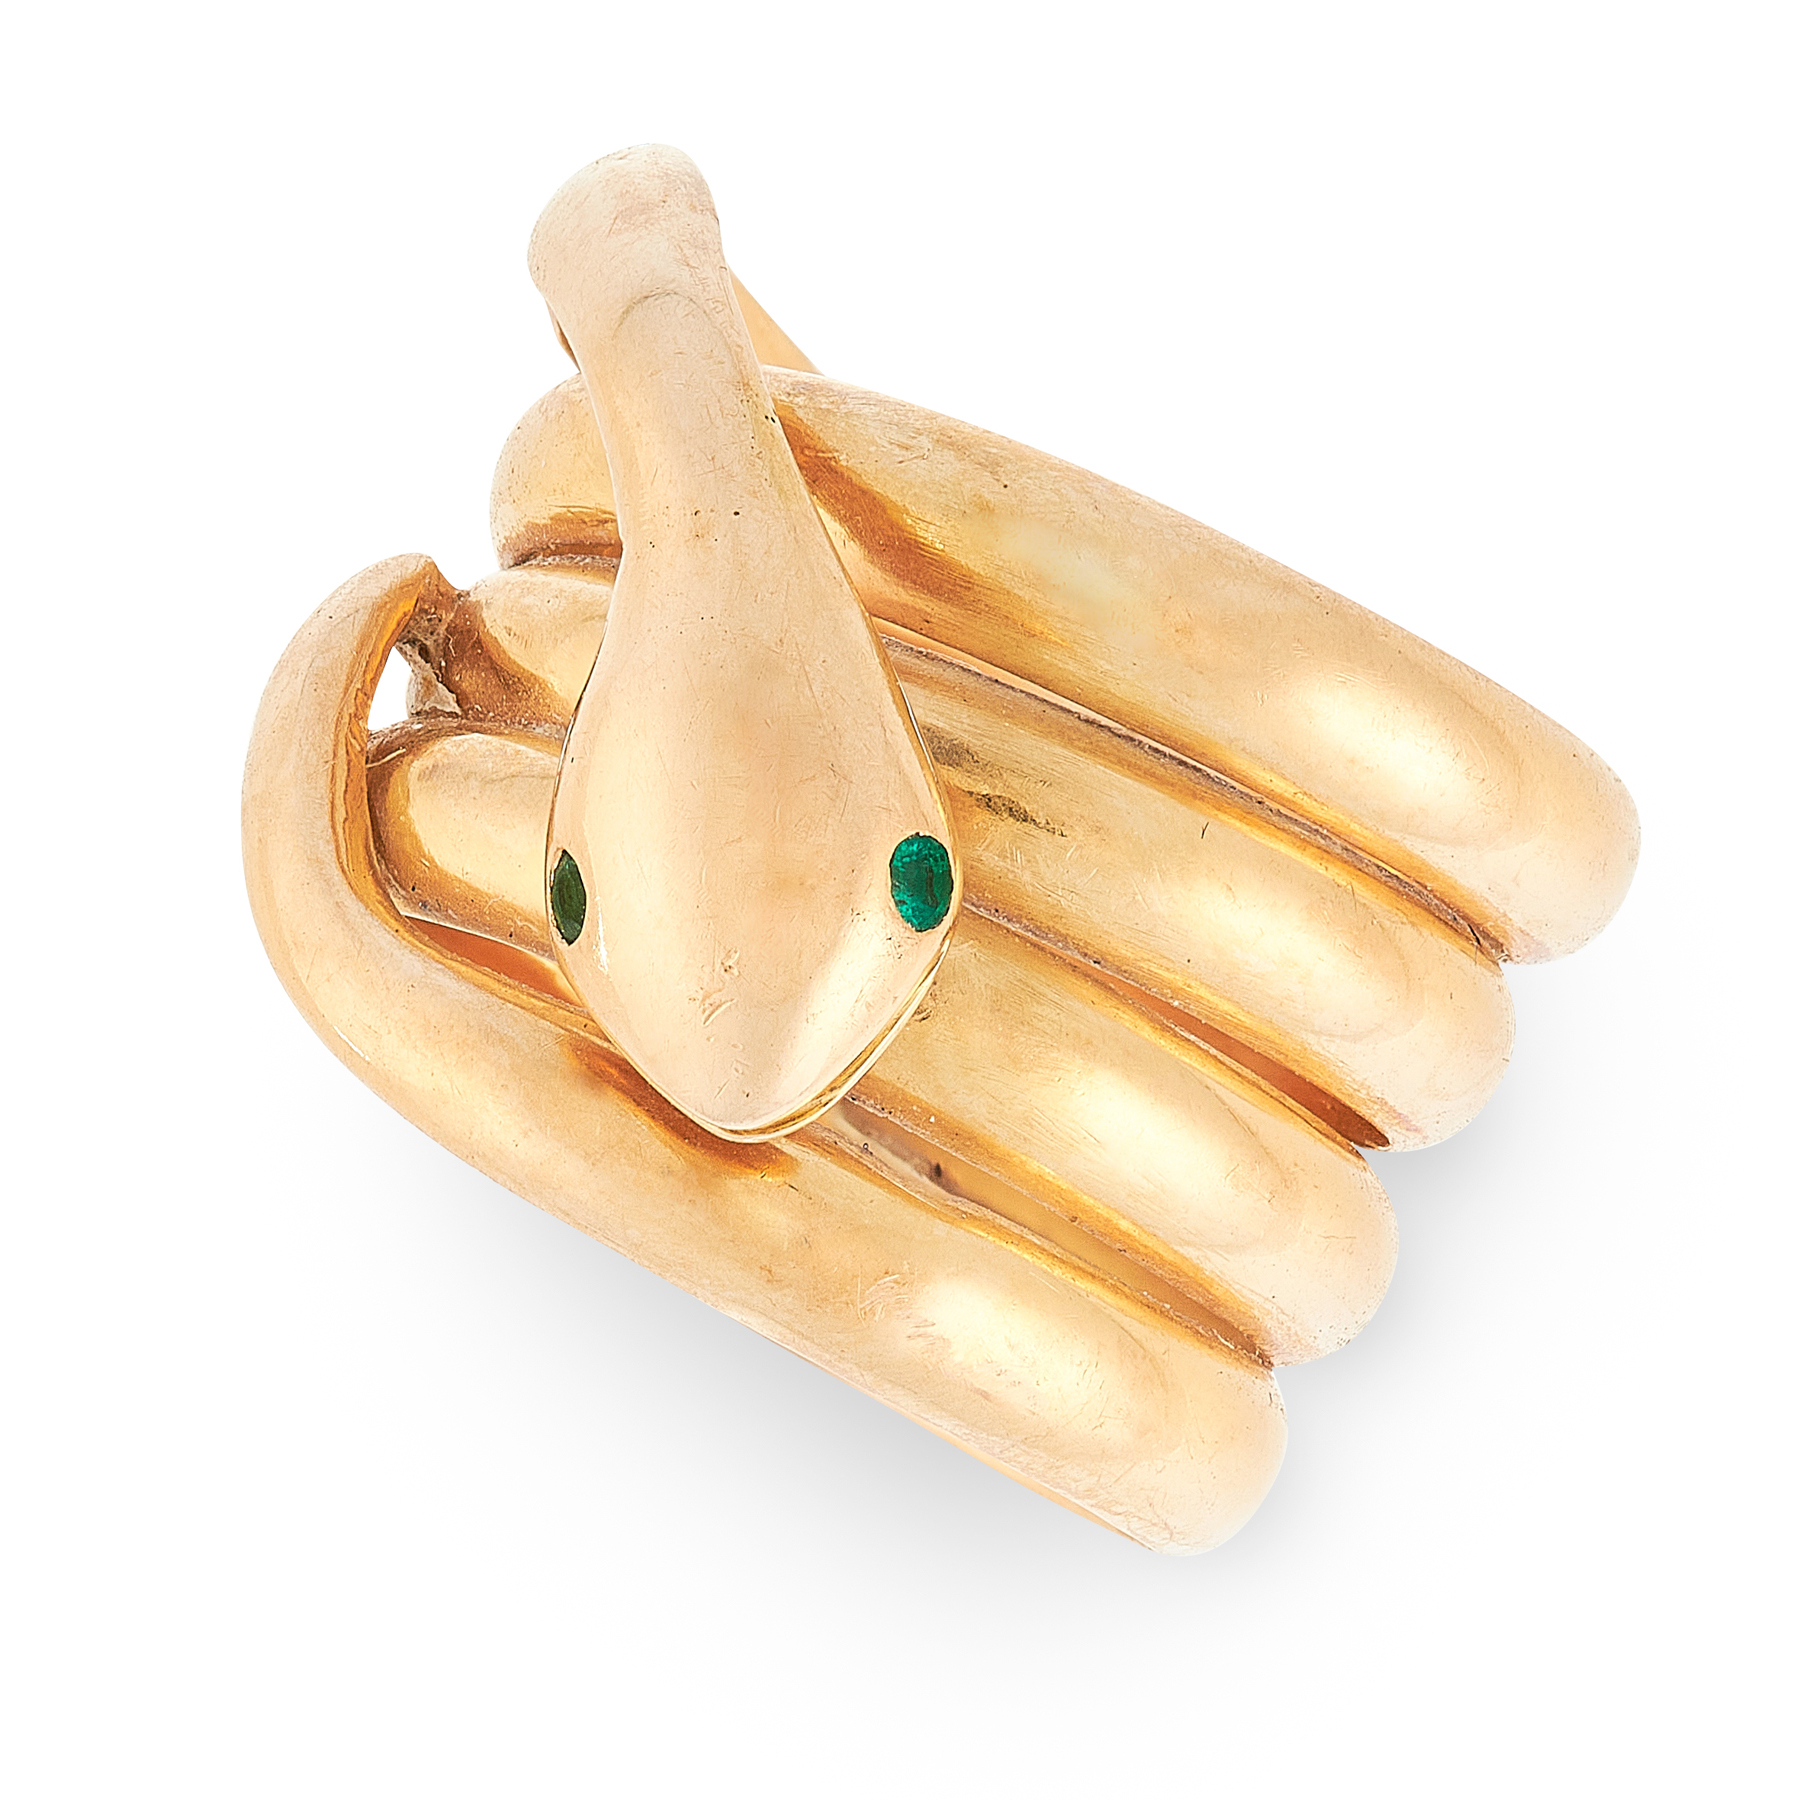 AN EMERALD SNAKE RING in 18ct yellow gold, comprised of a snake coiled around itself four times,